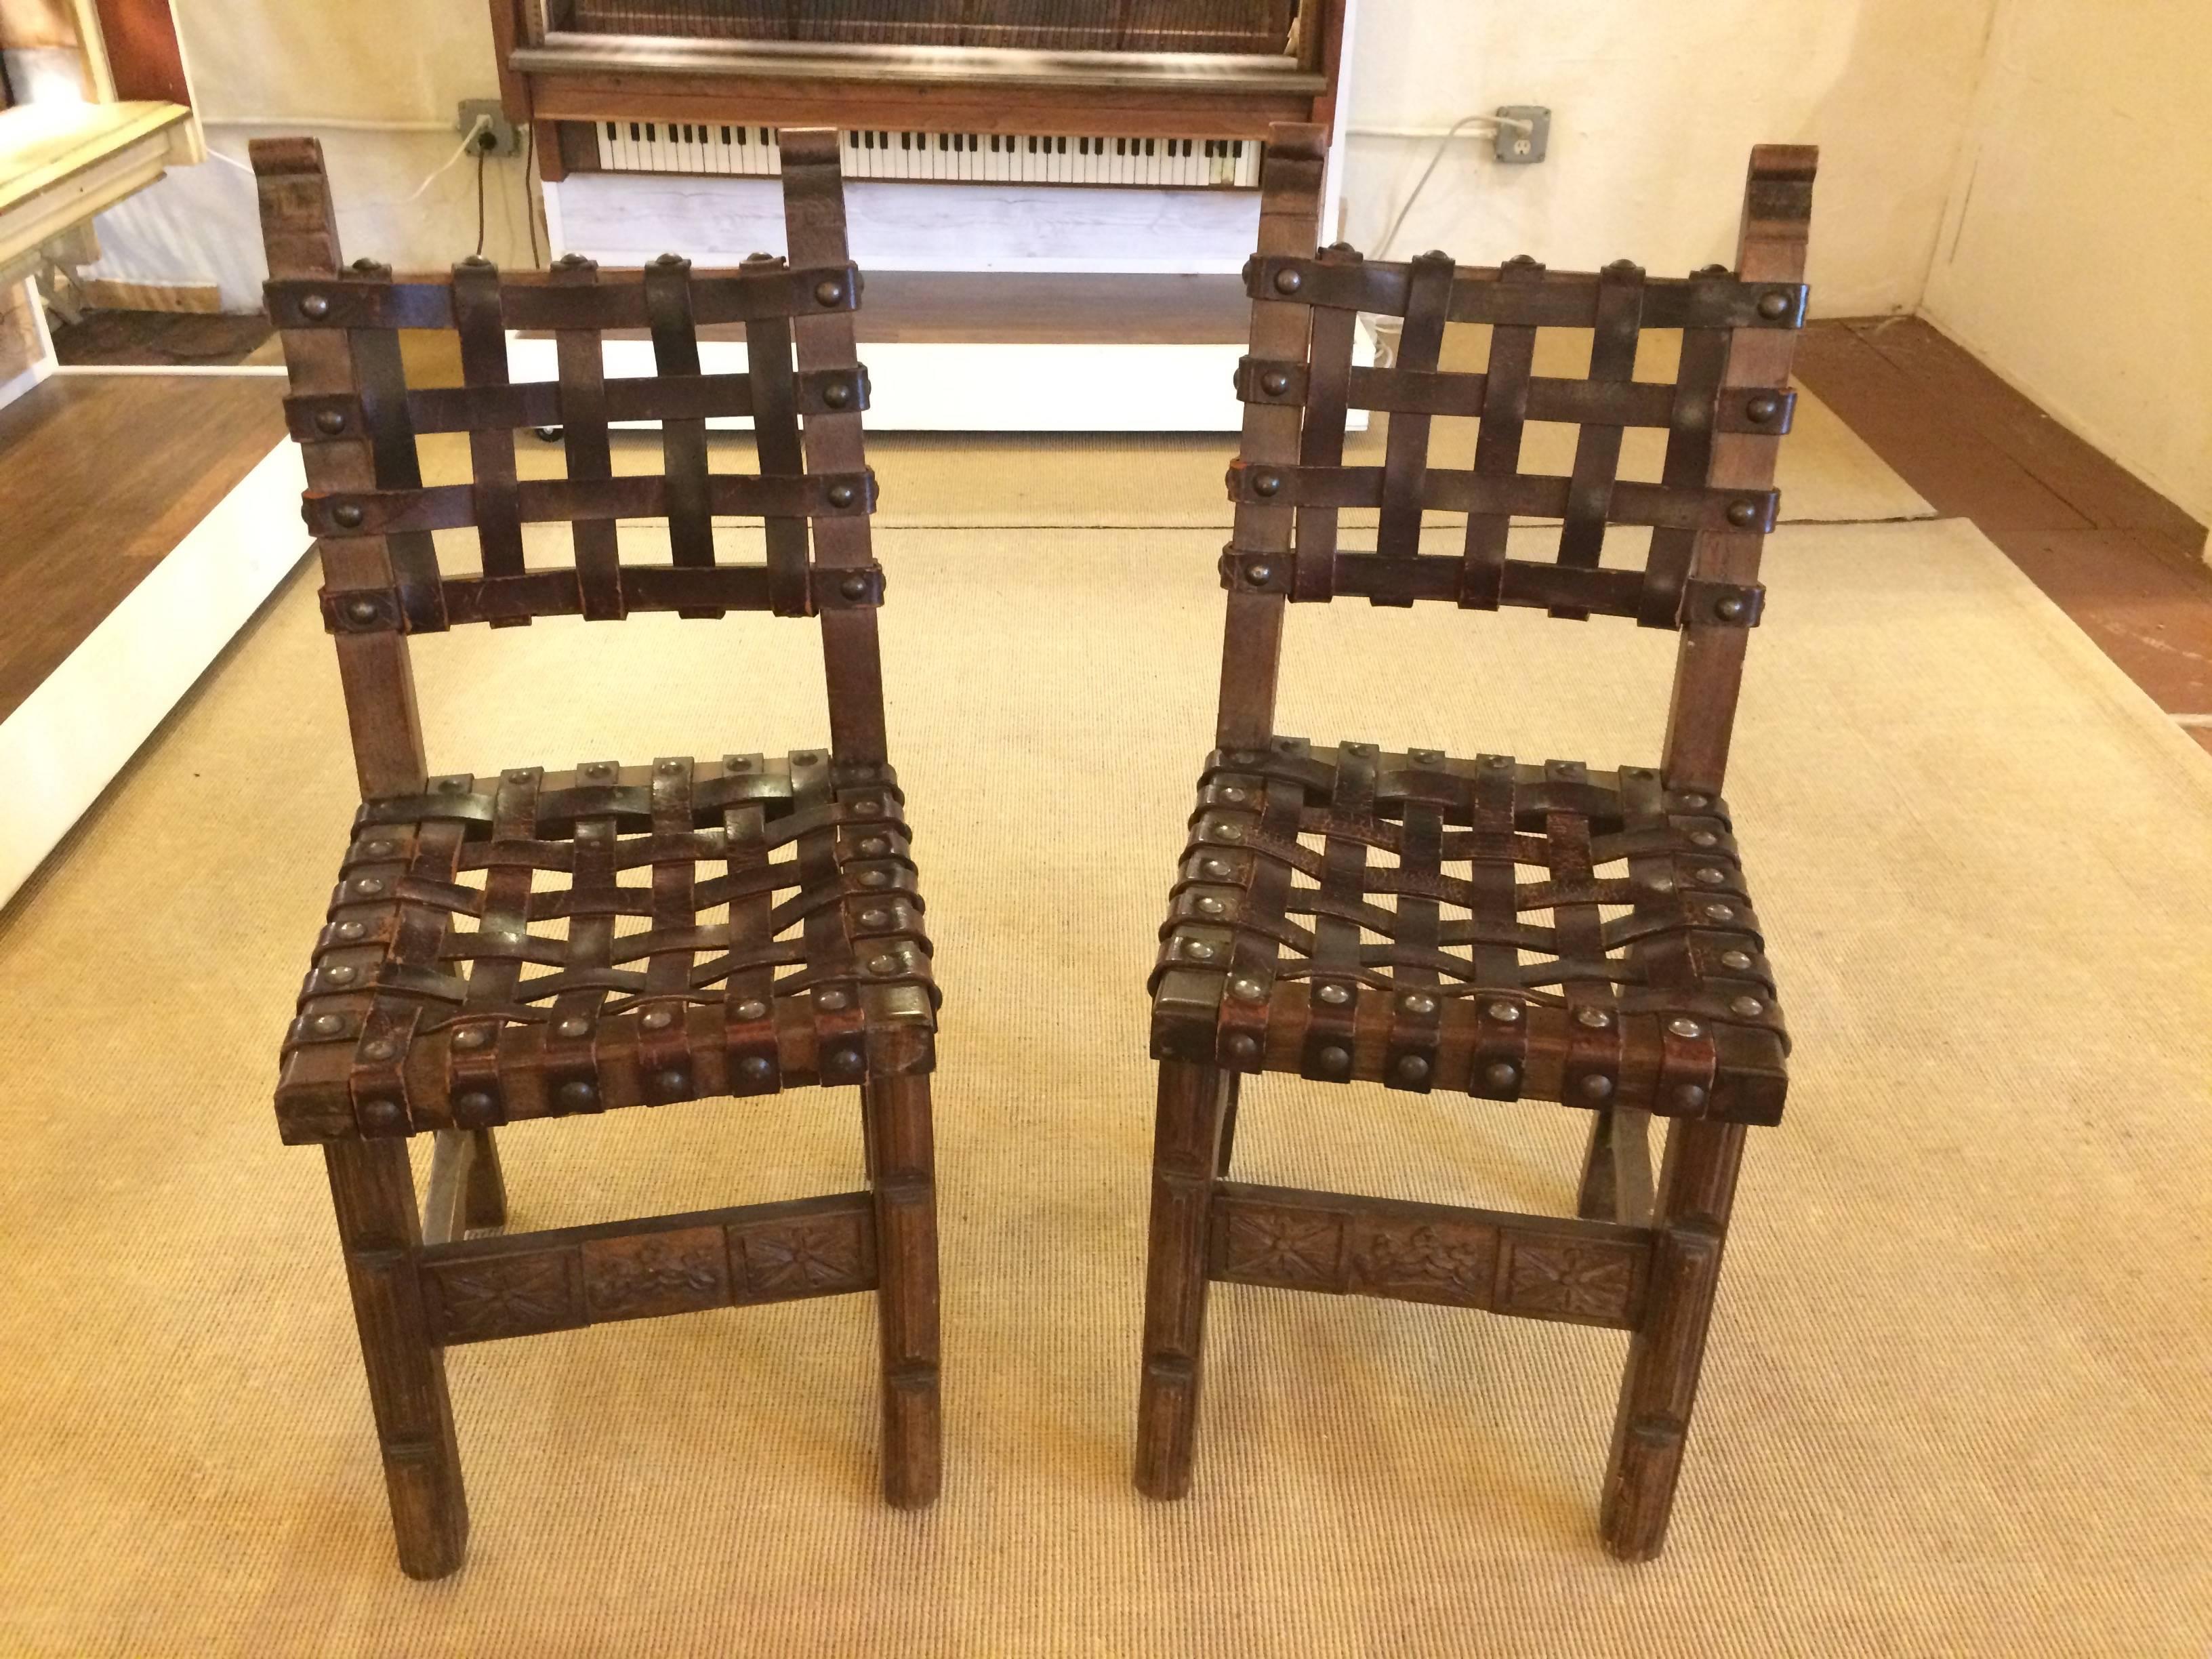 Two antique Spanish side chairs having wonderfully carved wood bases and rich heavy woven strap leather seats and backs with big masculine nailhead studs. By Navarro Argudo, Spain. Leather has natural aged distressed patina.